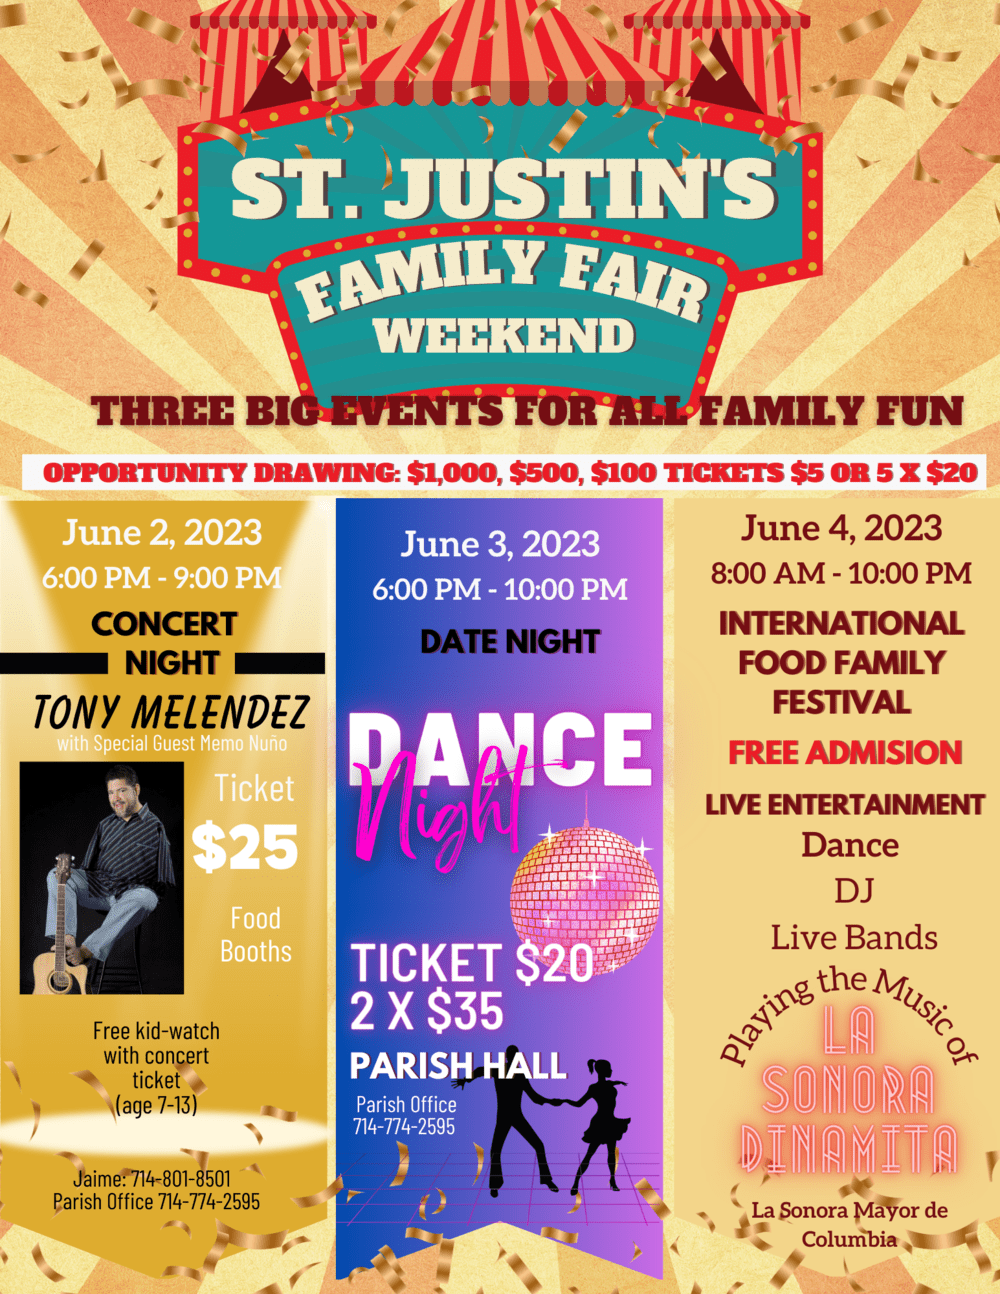 2023 05 21 st justin family fair weekend